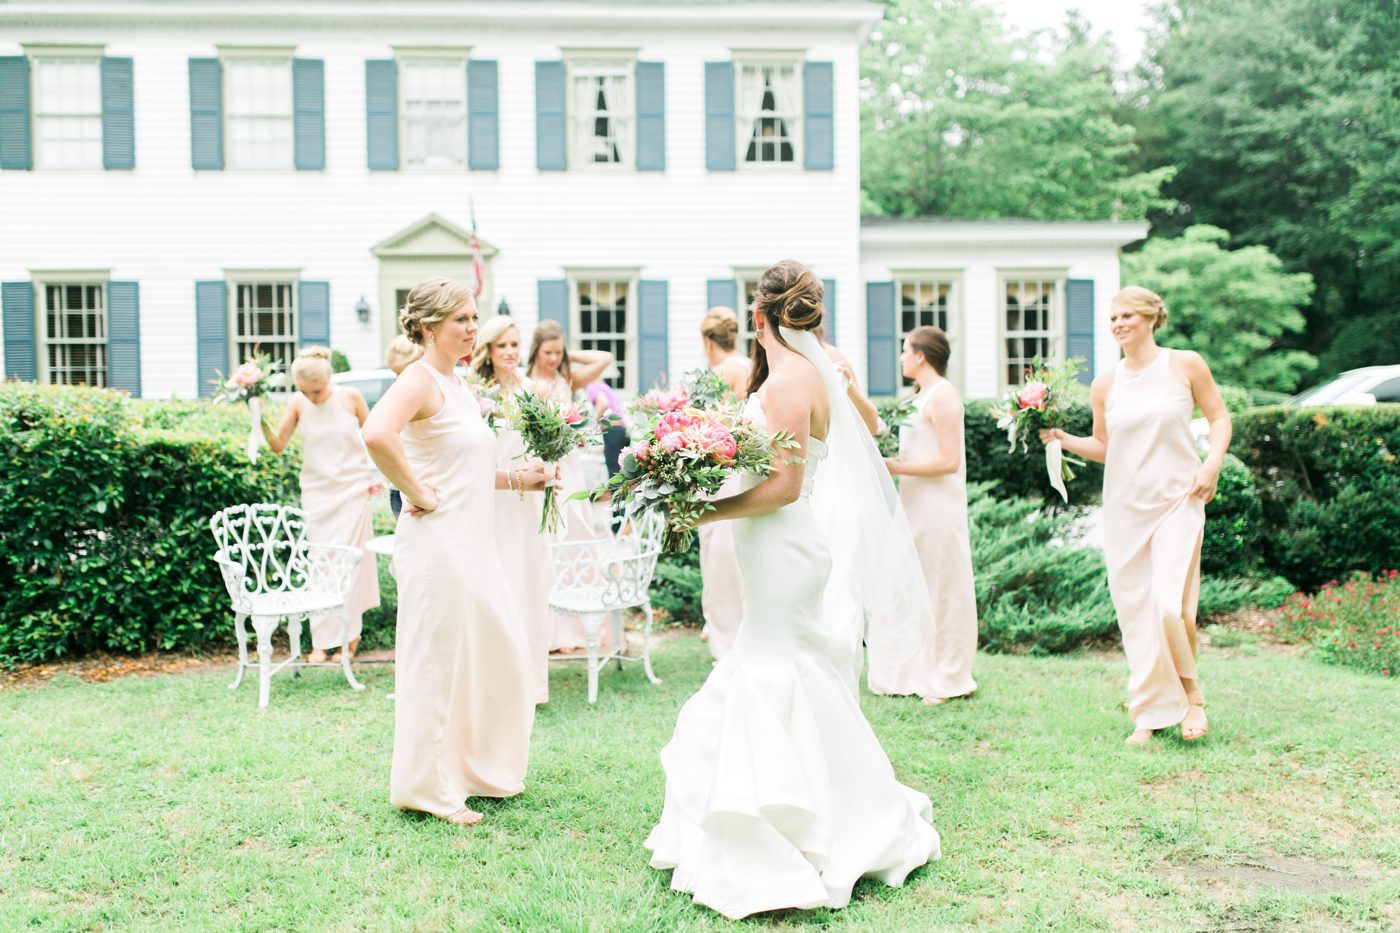 Bride and bridesmaids walking together. Photo by Charleston wedding photographer Catherine Ann Photography